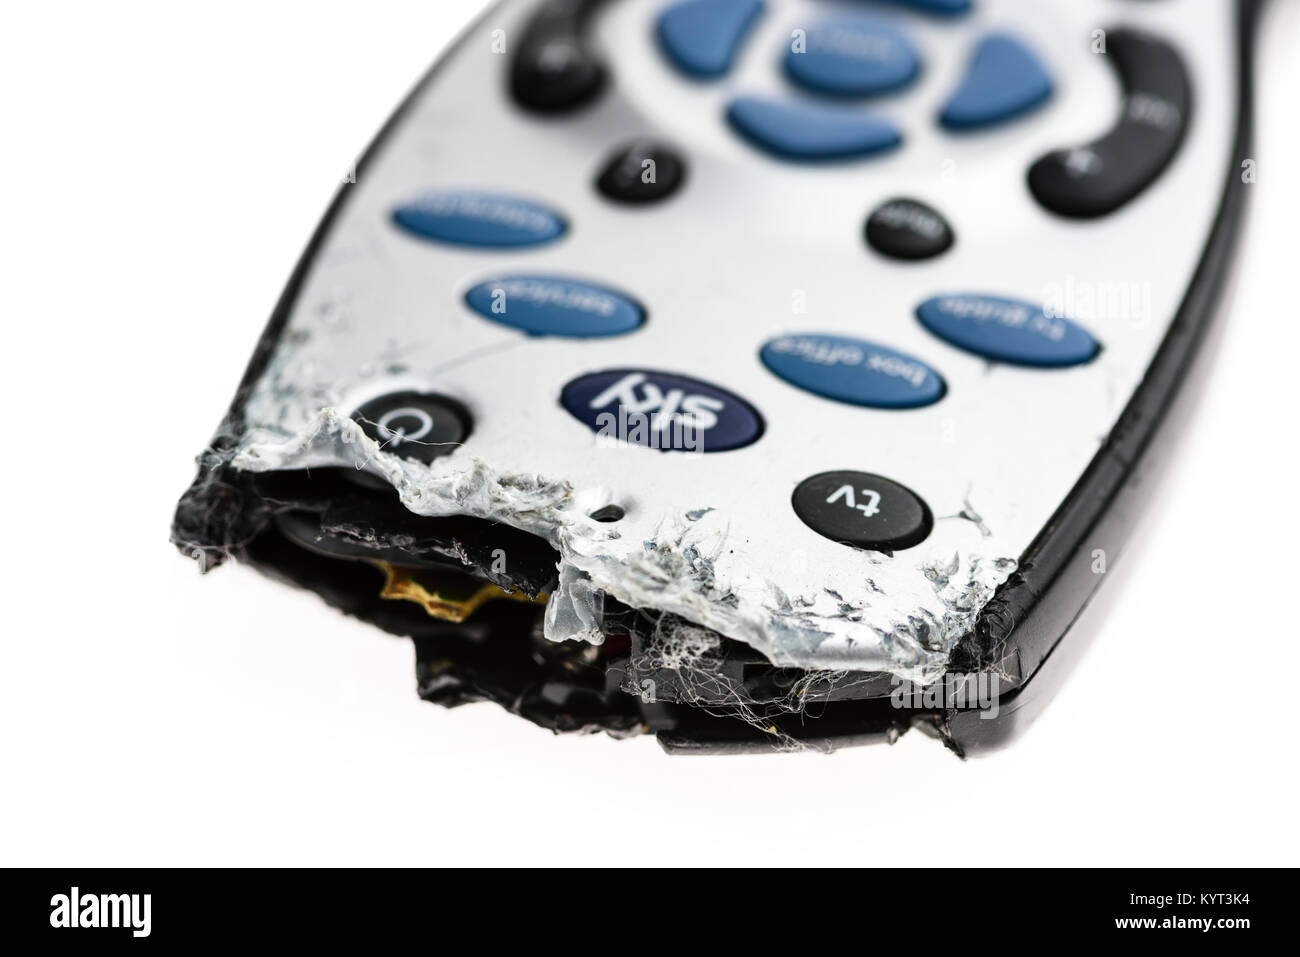 Sky remote control which has been chewed by a puppy dog. Stock Photo